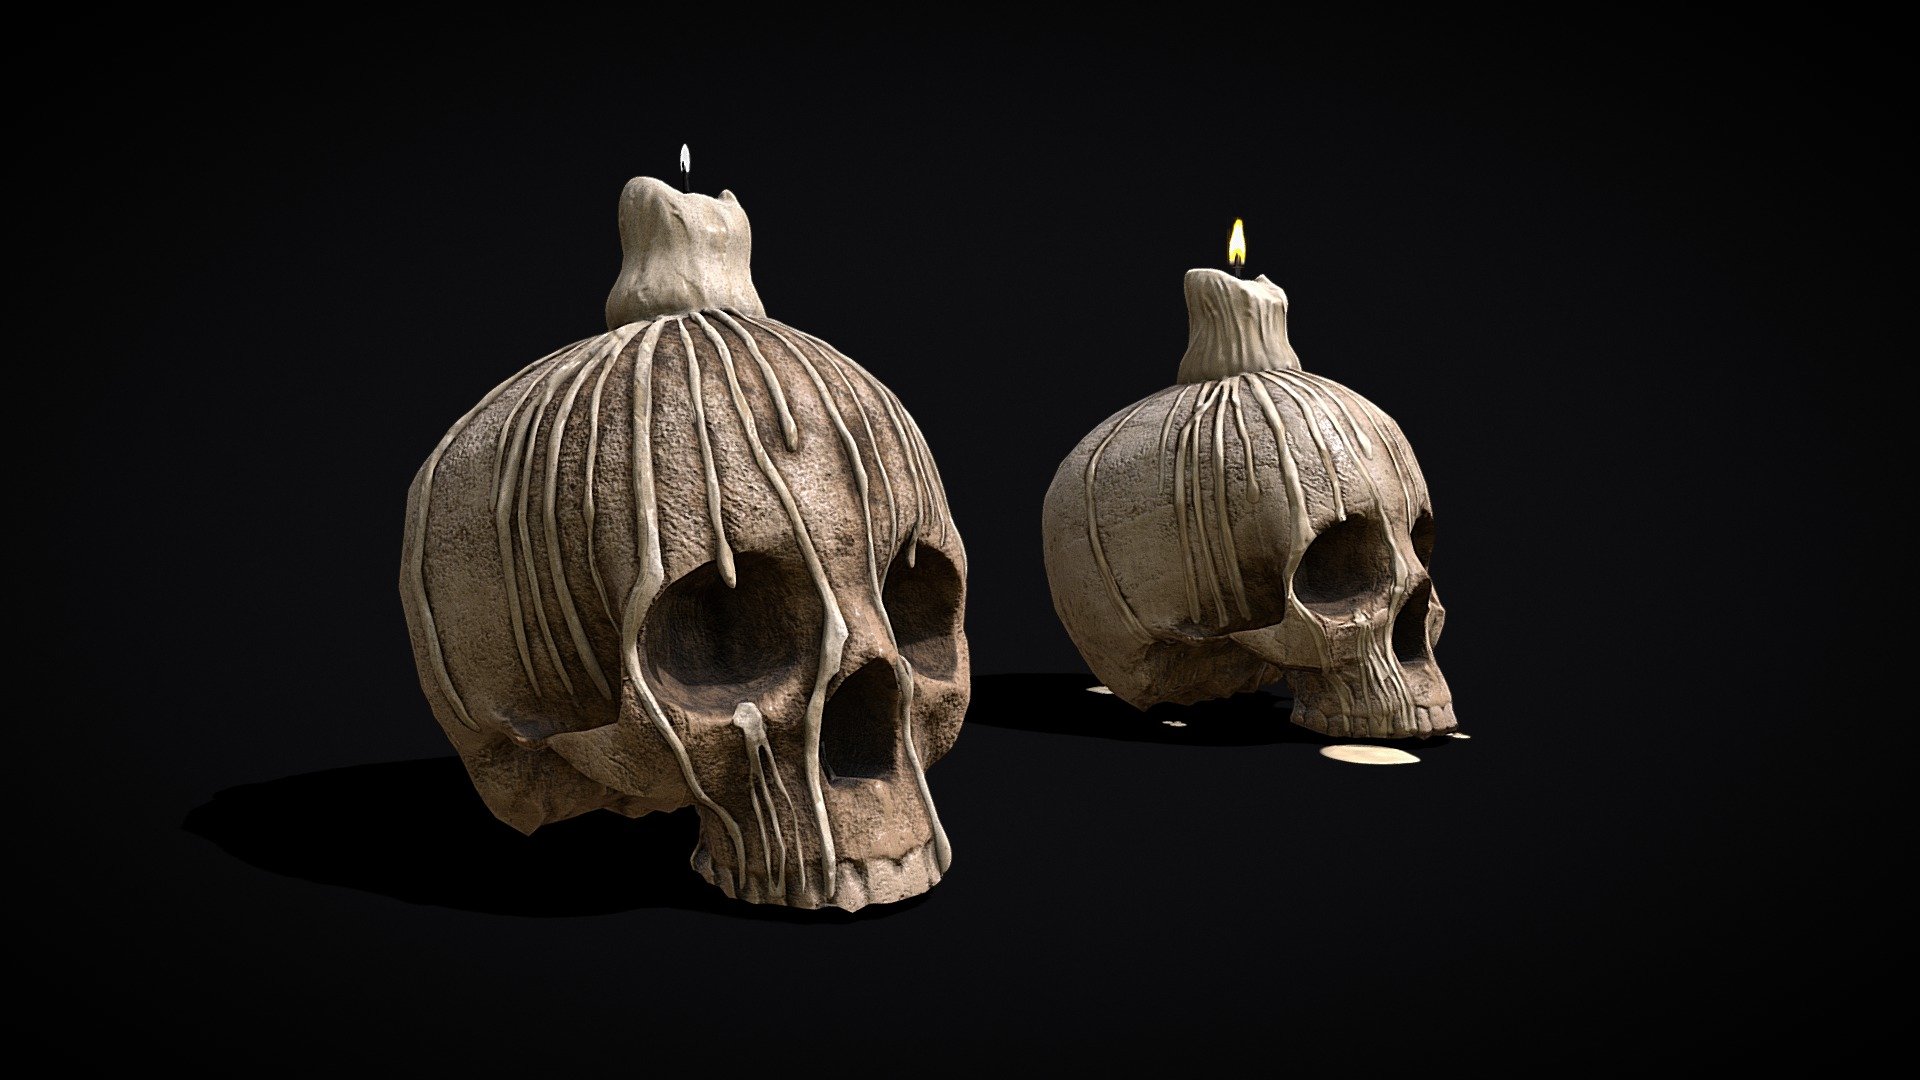 Candle Skull with Dripping Wax Includes 2 versions _ lowpoly baked wax - Higherpoly Sculpted wax
VR / AR / Low-poly
PBR approved
Geometry Polygon mesh
Polygons 3,550
Vertices 3,590
Textures 4K - Candle Skull with Dripping Wax - Buy Royalty Free 3D model by GetDeadEntertainment 3d model